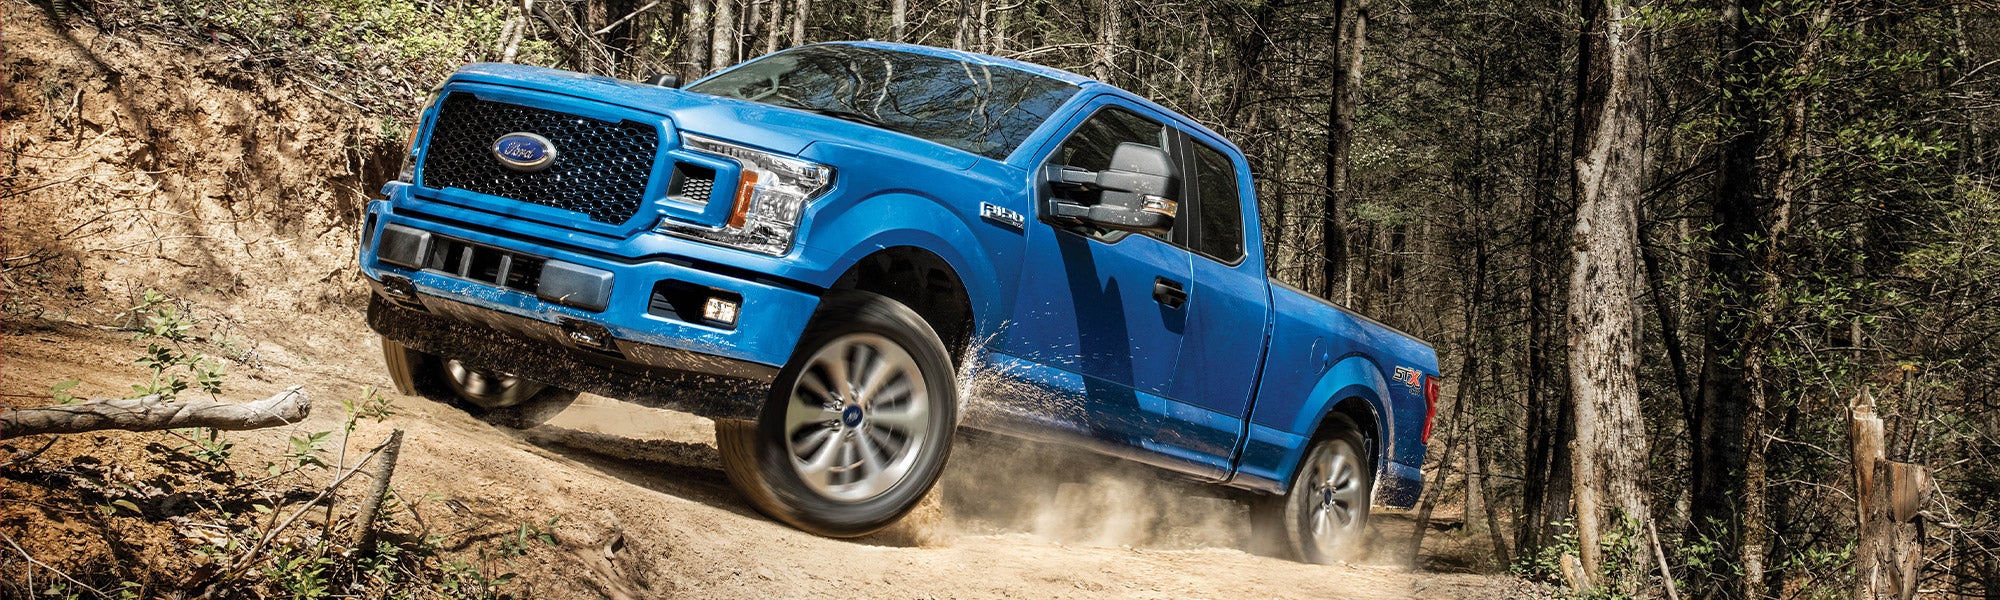 2020 Ford F-150 | Towing Capacity | McCandless Ford Meadville 2020 F 150 5.0 L Towing Capacity